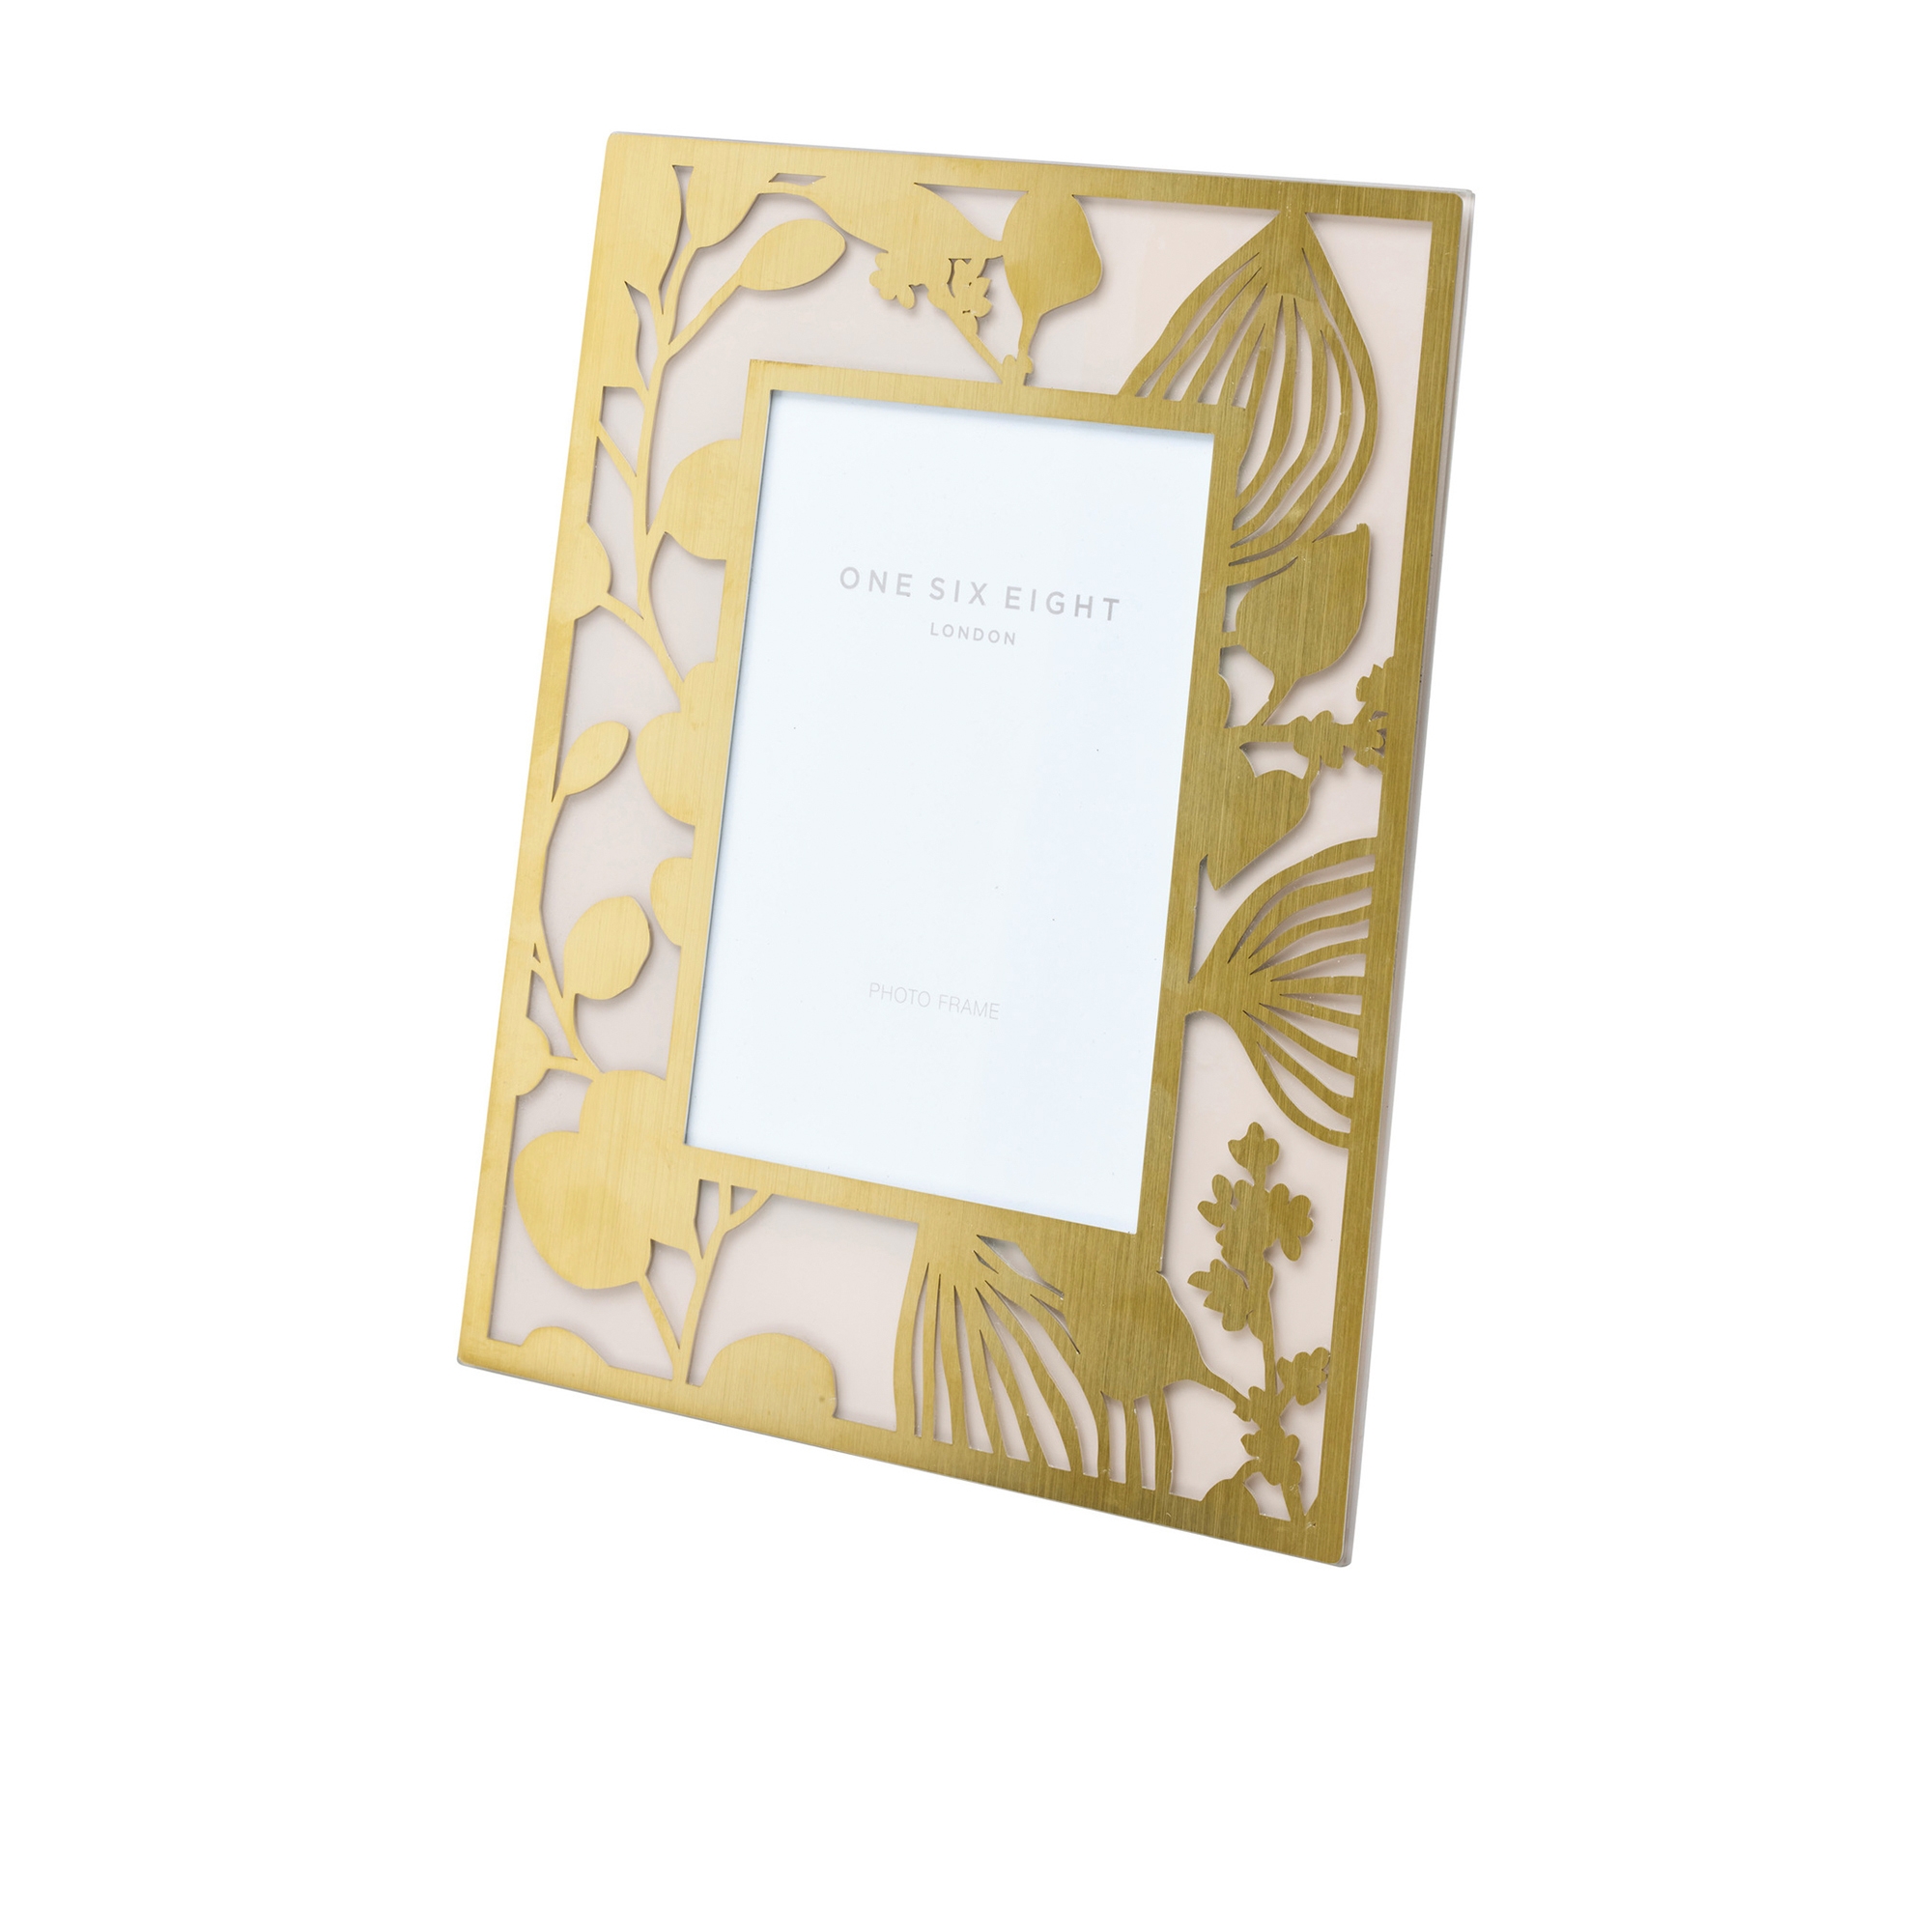 One Six Eight London Floral Glass Photo Frame 20.5x25.5cm Gold Image 1